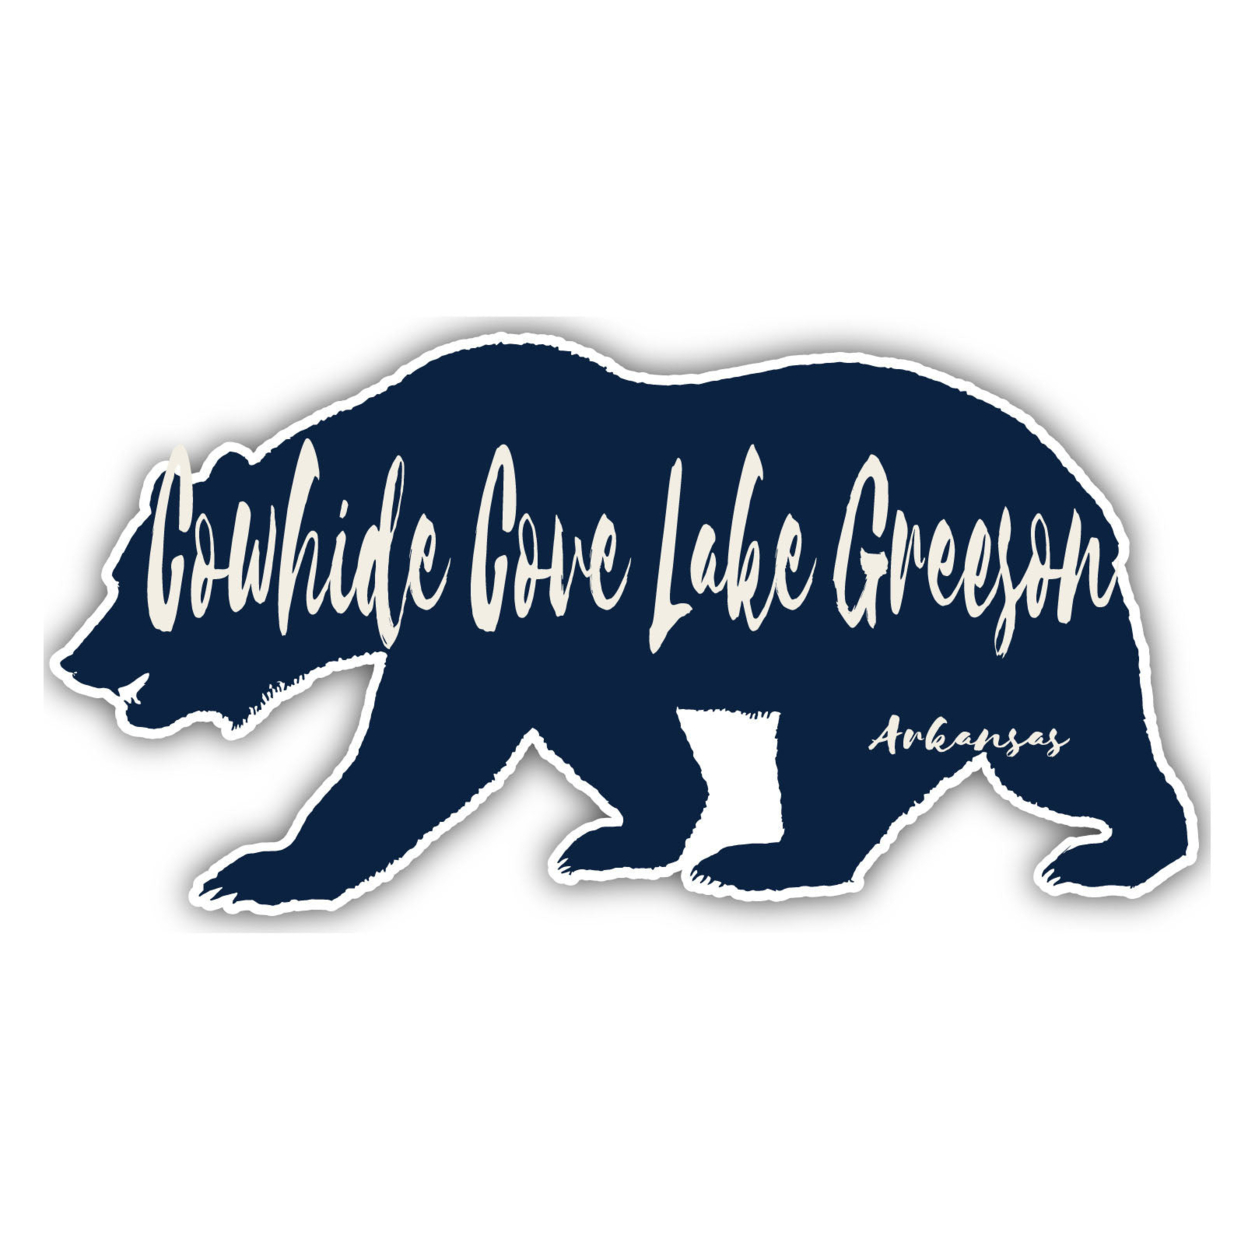 Cowhide Cove Lake Greeson Arkansas Souvenir Decorative Stickers (Choose Theme And Size) - 4-Pack, 6-Inch, Tent